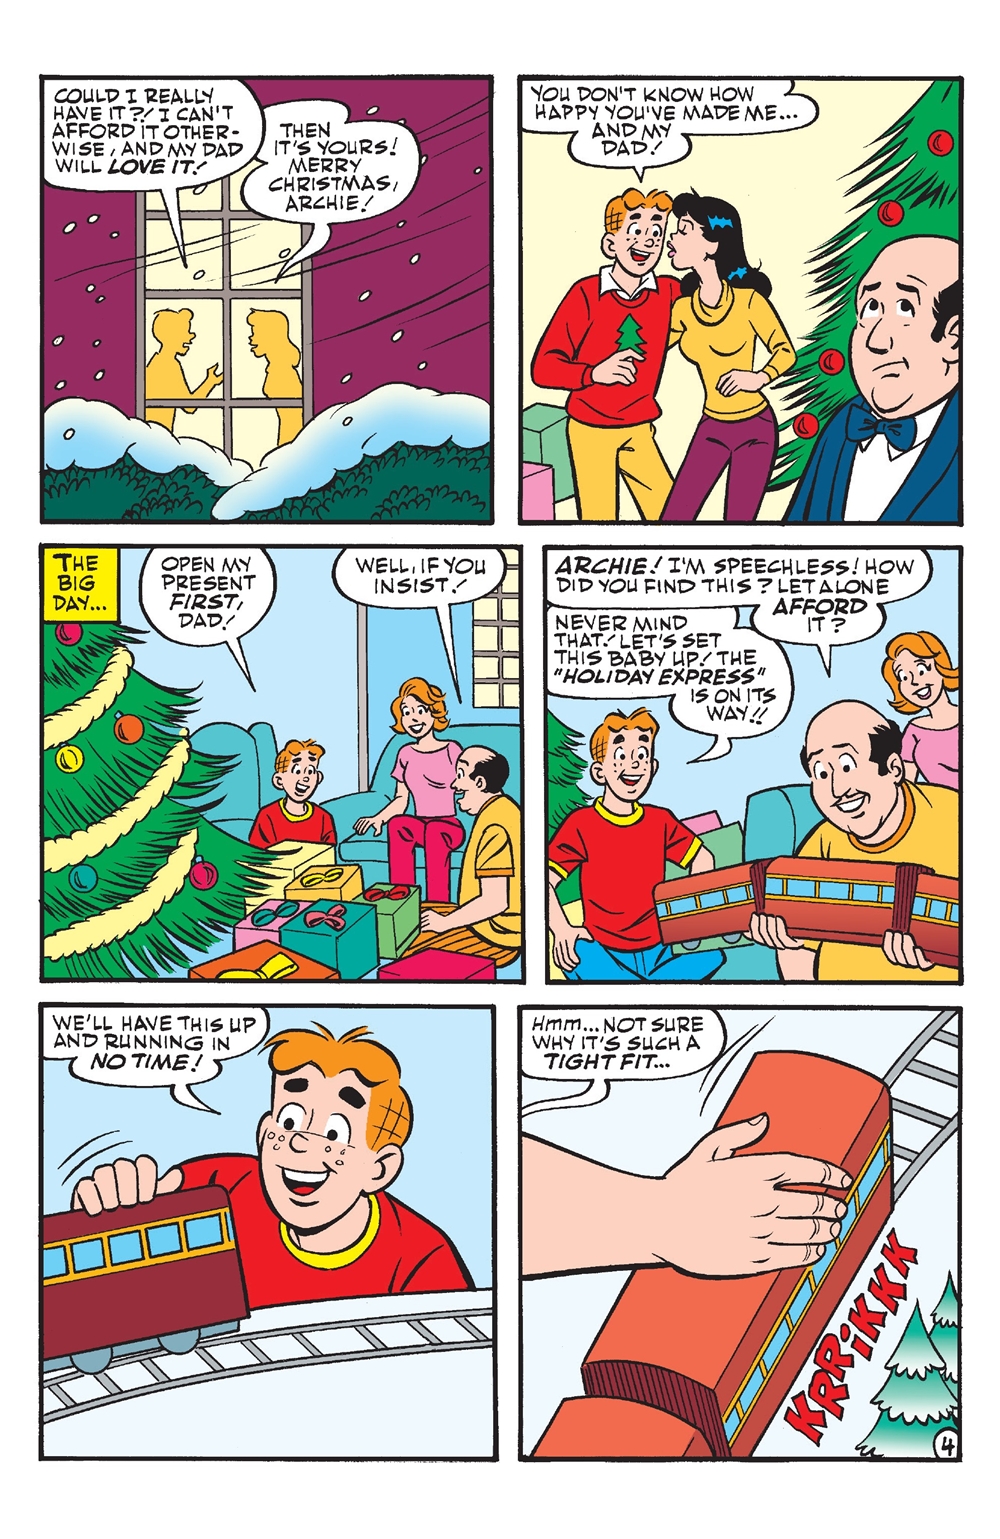 Archie%2527s%2BChristmas%2BSpectacular%2B%25282018%2529-010